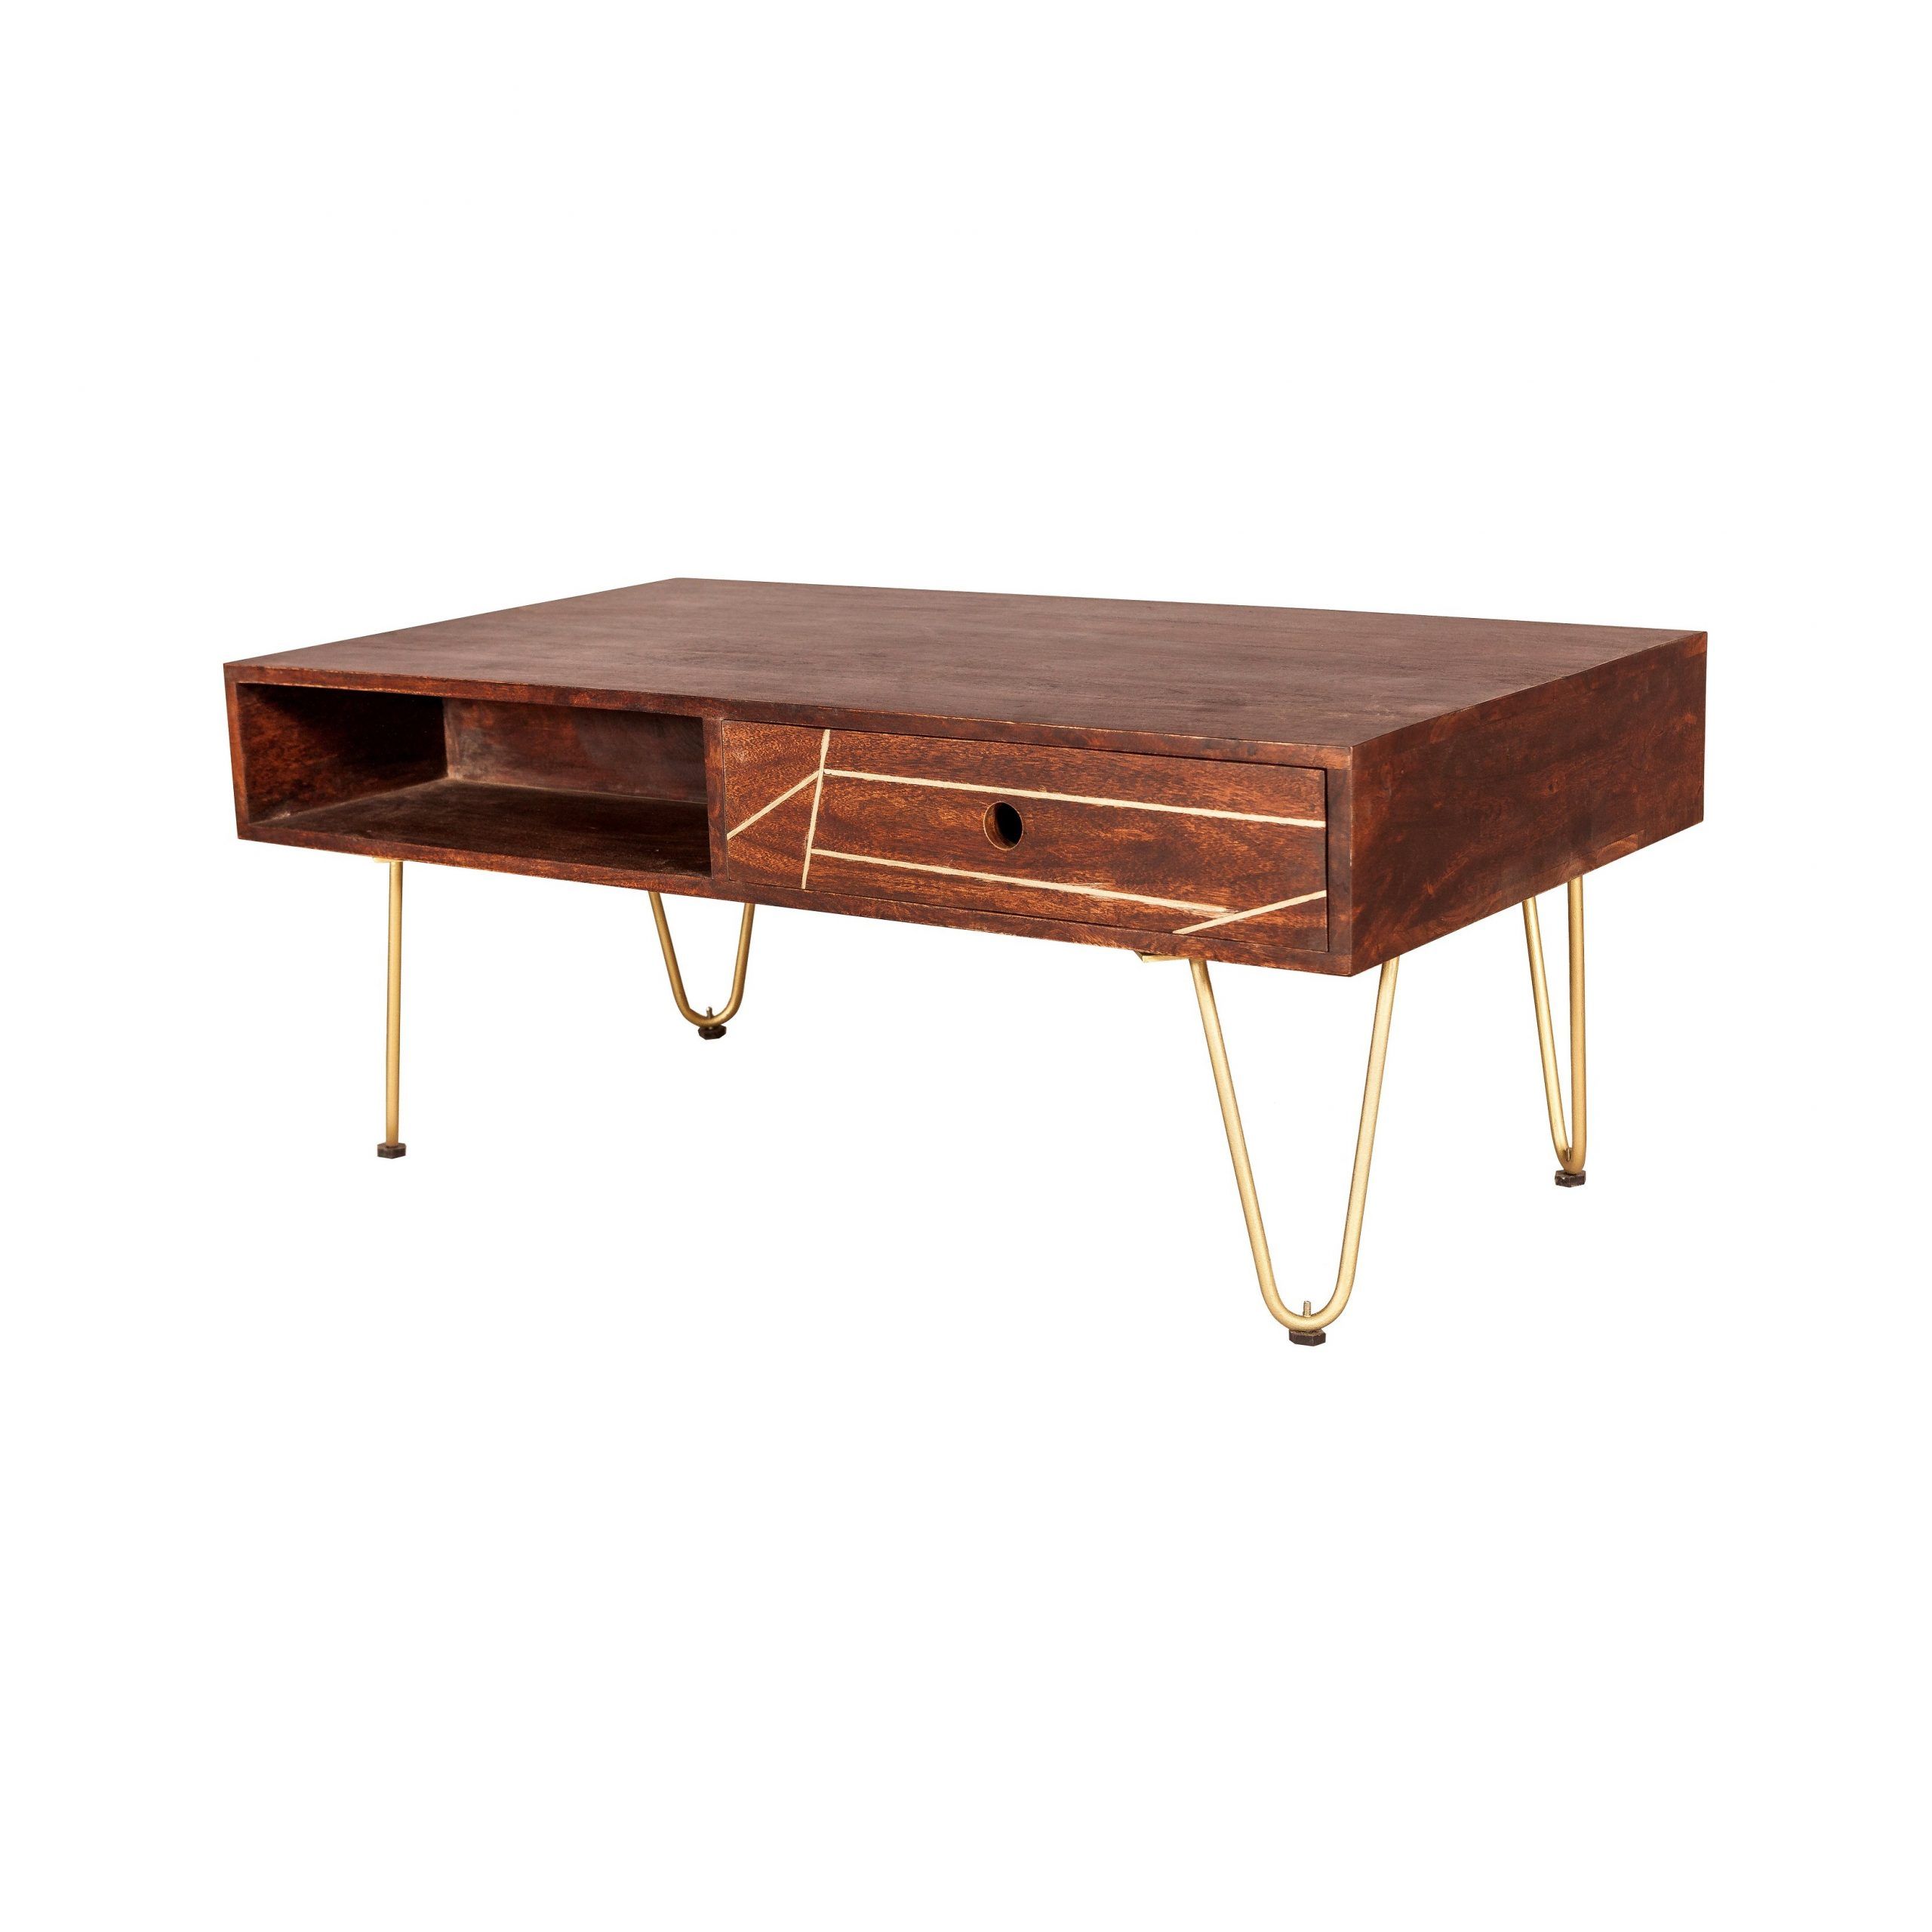 Fashionable Dark Gold Rectangular Coffee Table With Drawer Intended For Antiqued Gold Rectangular Coffee Tables (View 17 of 20)